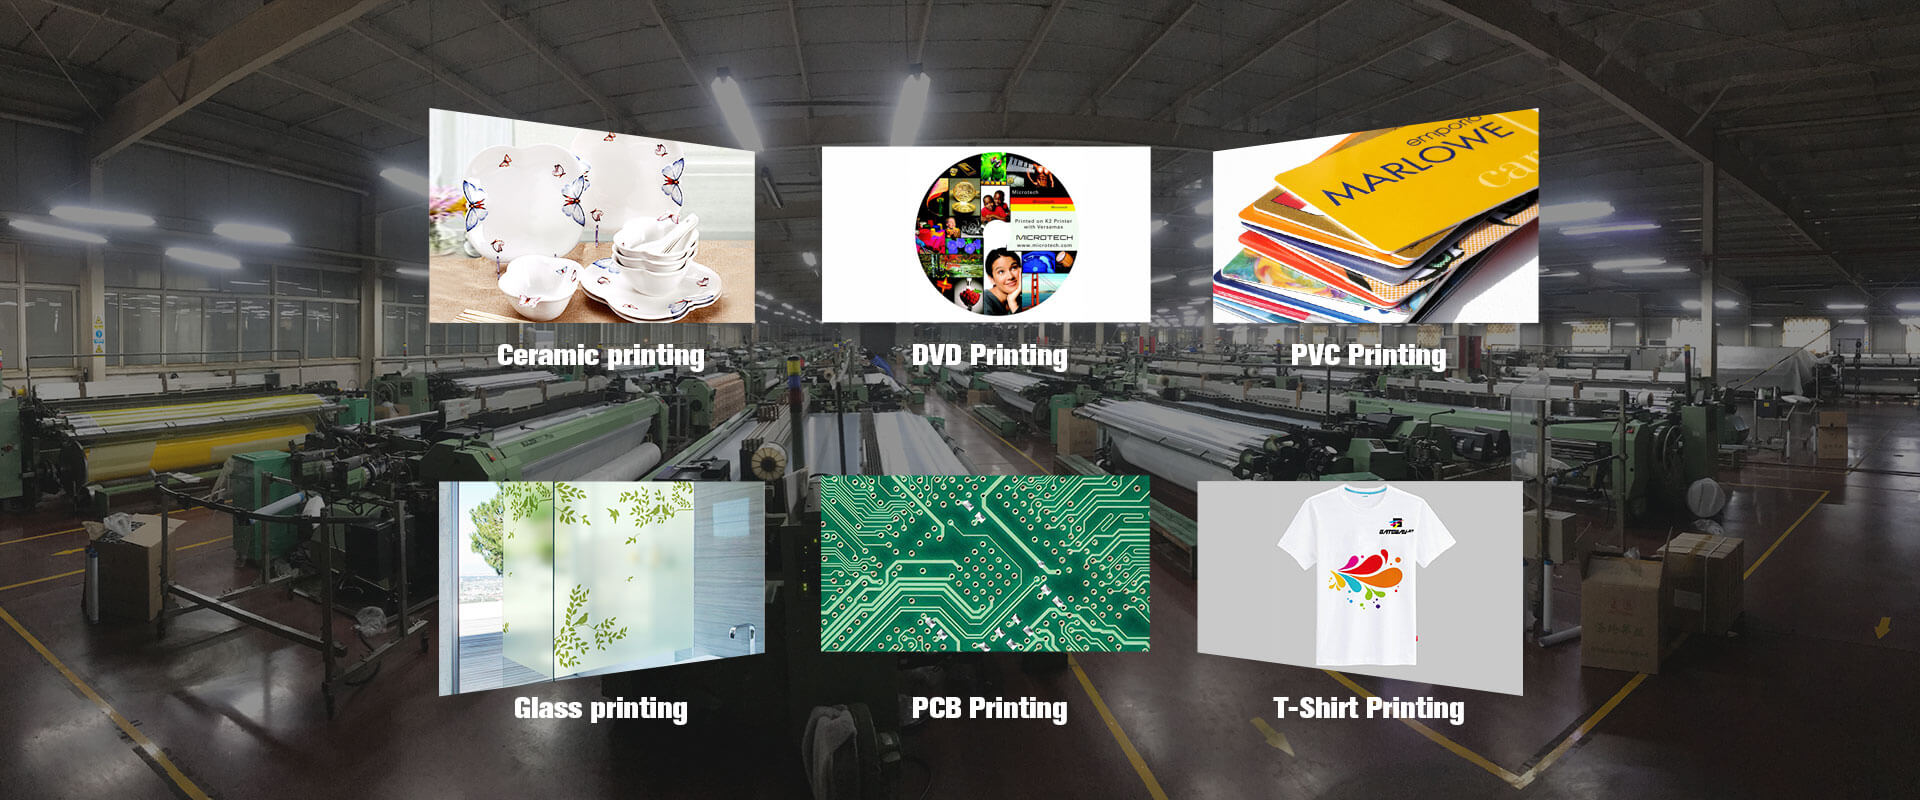 Hebei Paite Bolting Cloth Manufacturing Co., Ltd.